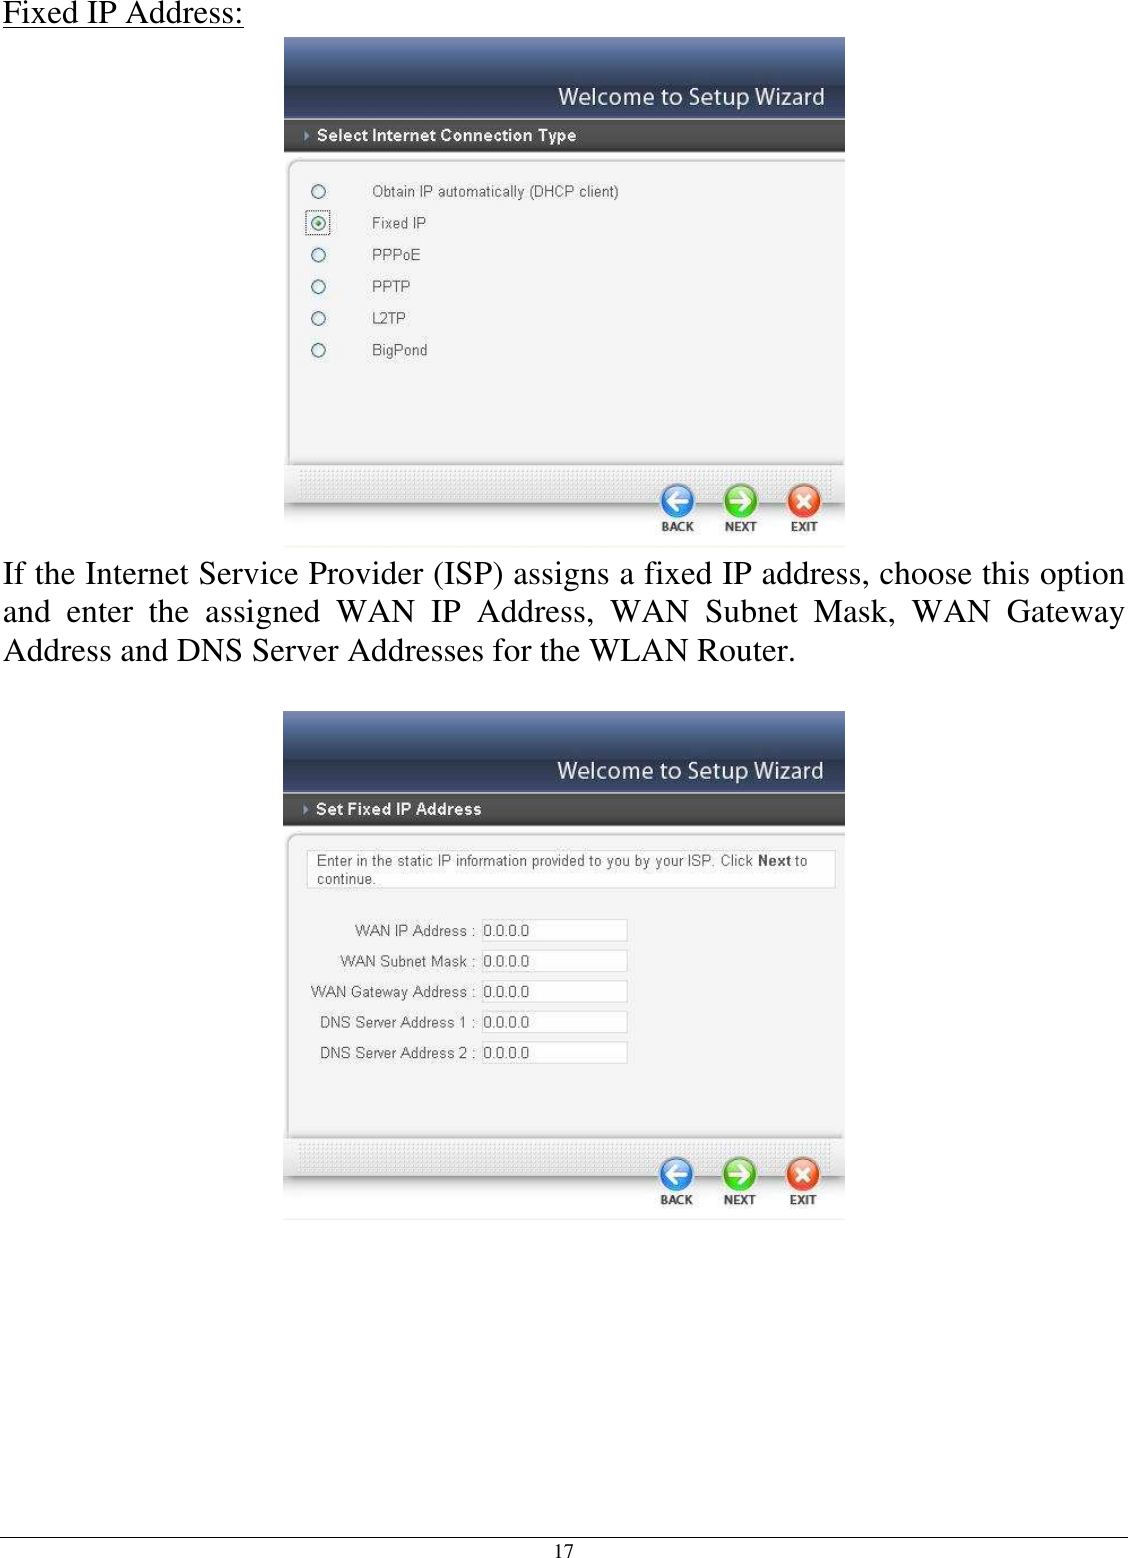 17 Fixed IP Address:  If the Internet Service Provider (ISP) assigns a fixed IP address, choose this option and  enter  the  assigned  WAN  IP  Address,  WAN  Subnet  Mask,  WAN  Gateway Address and DNS Server Addresses for the WLAN Router.    